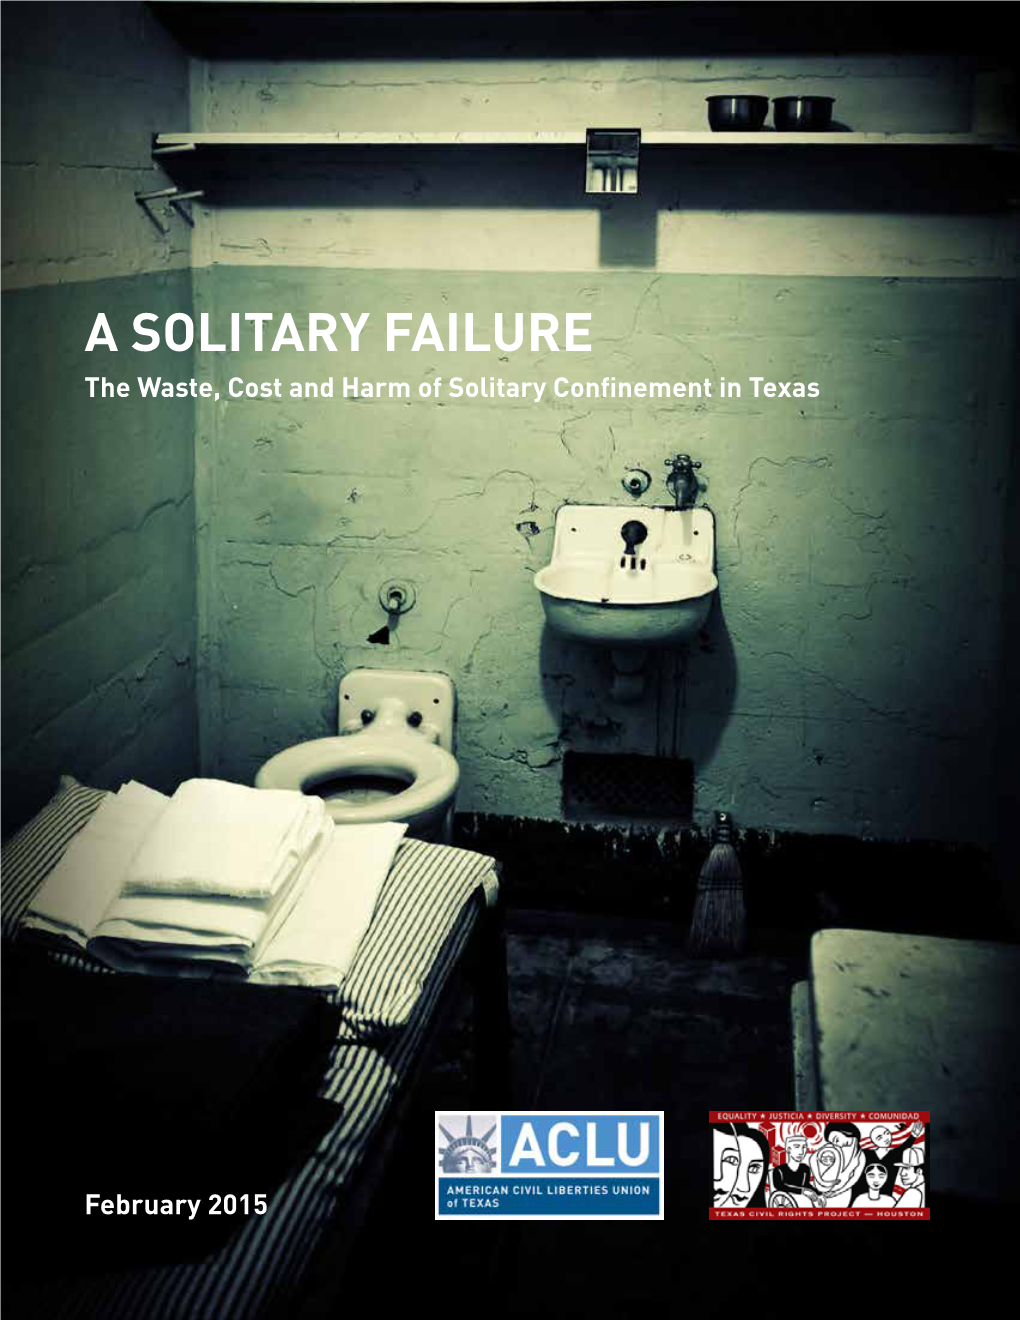 A Solitary Failure the Waste, Cost and Harm of Solitary Confinement in Texas